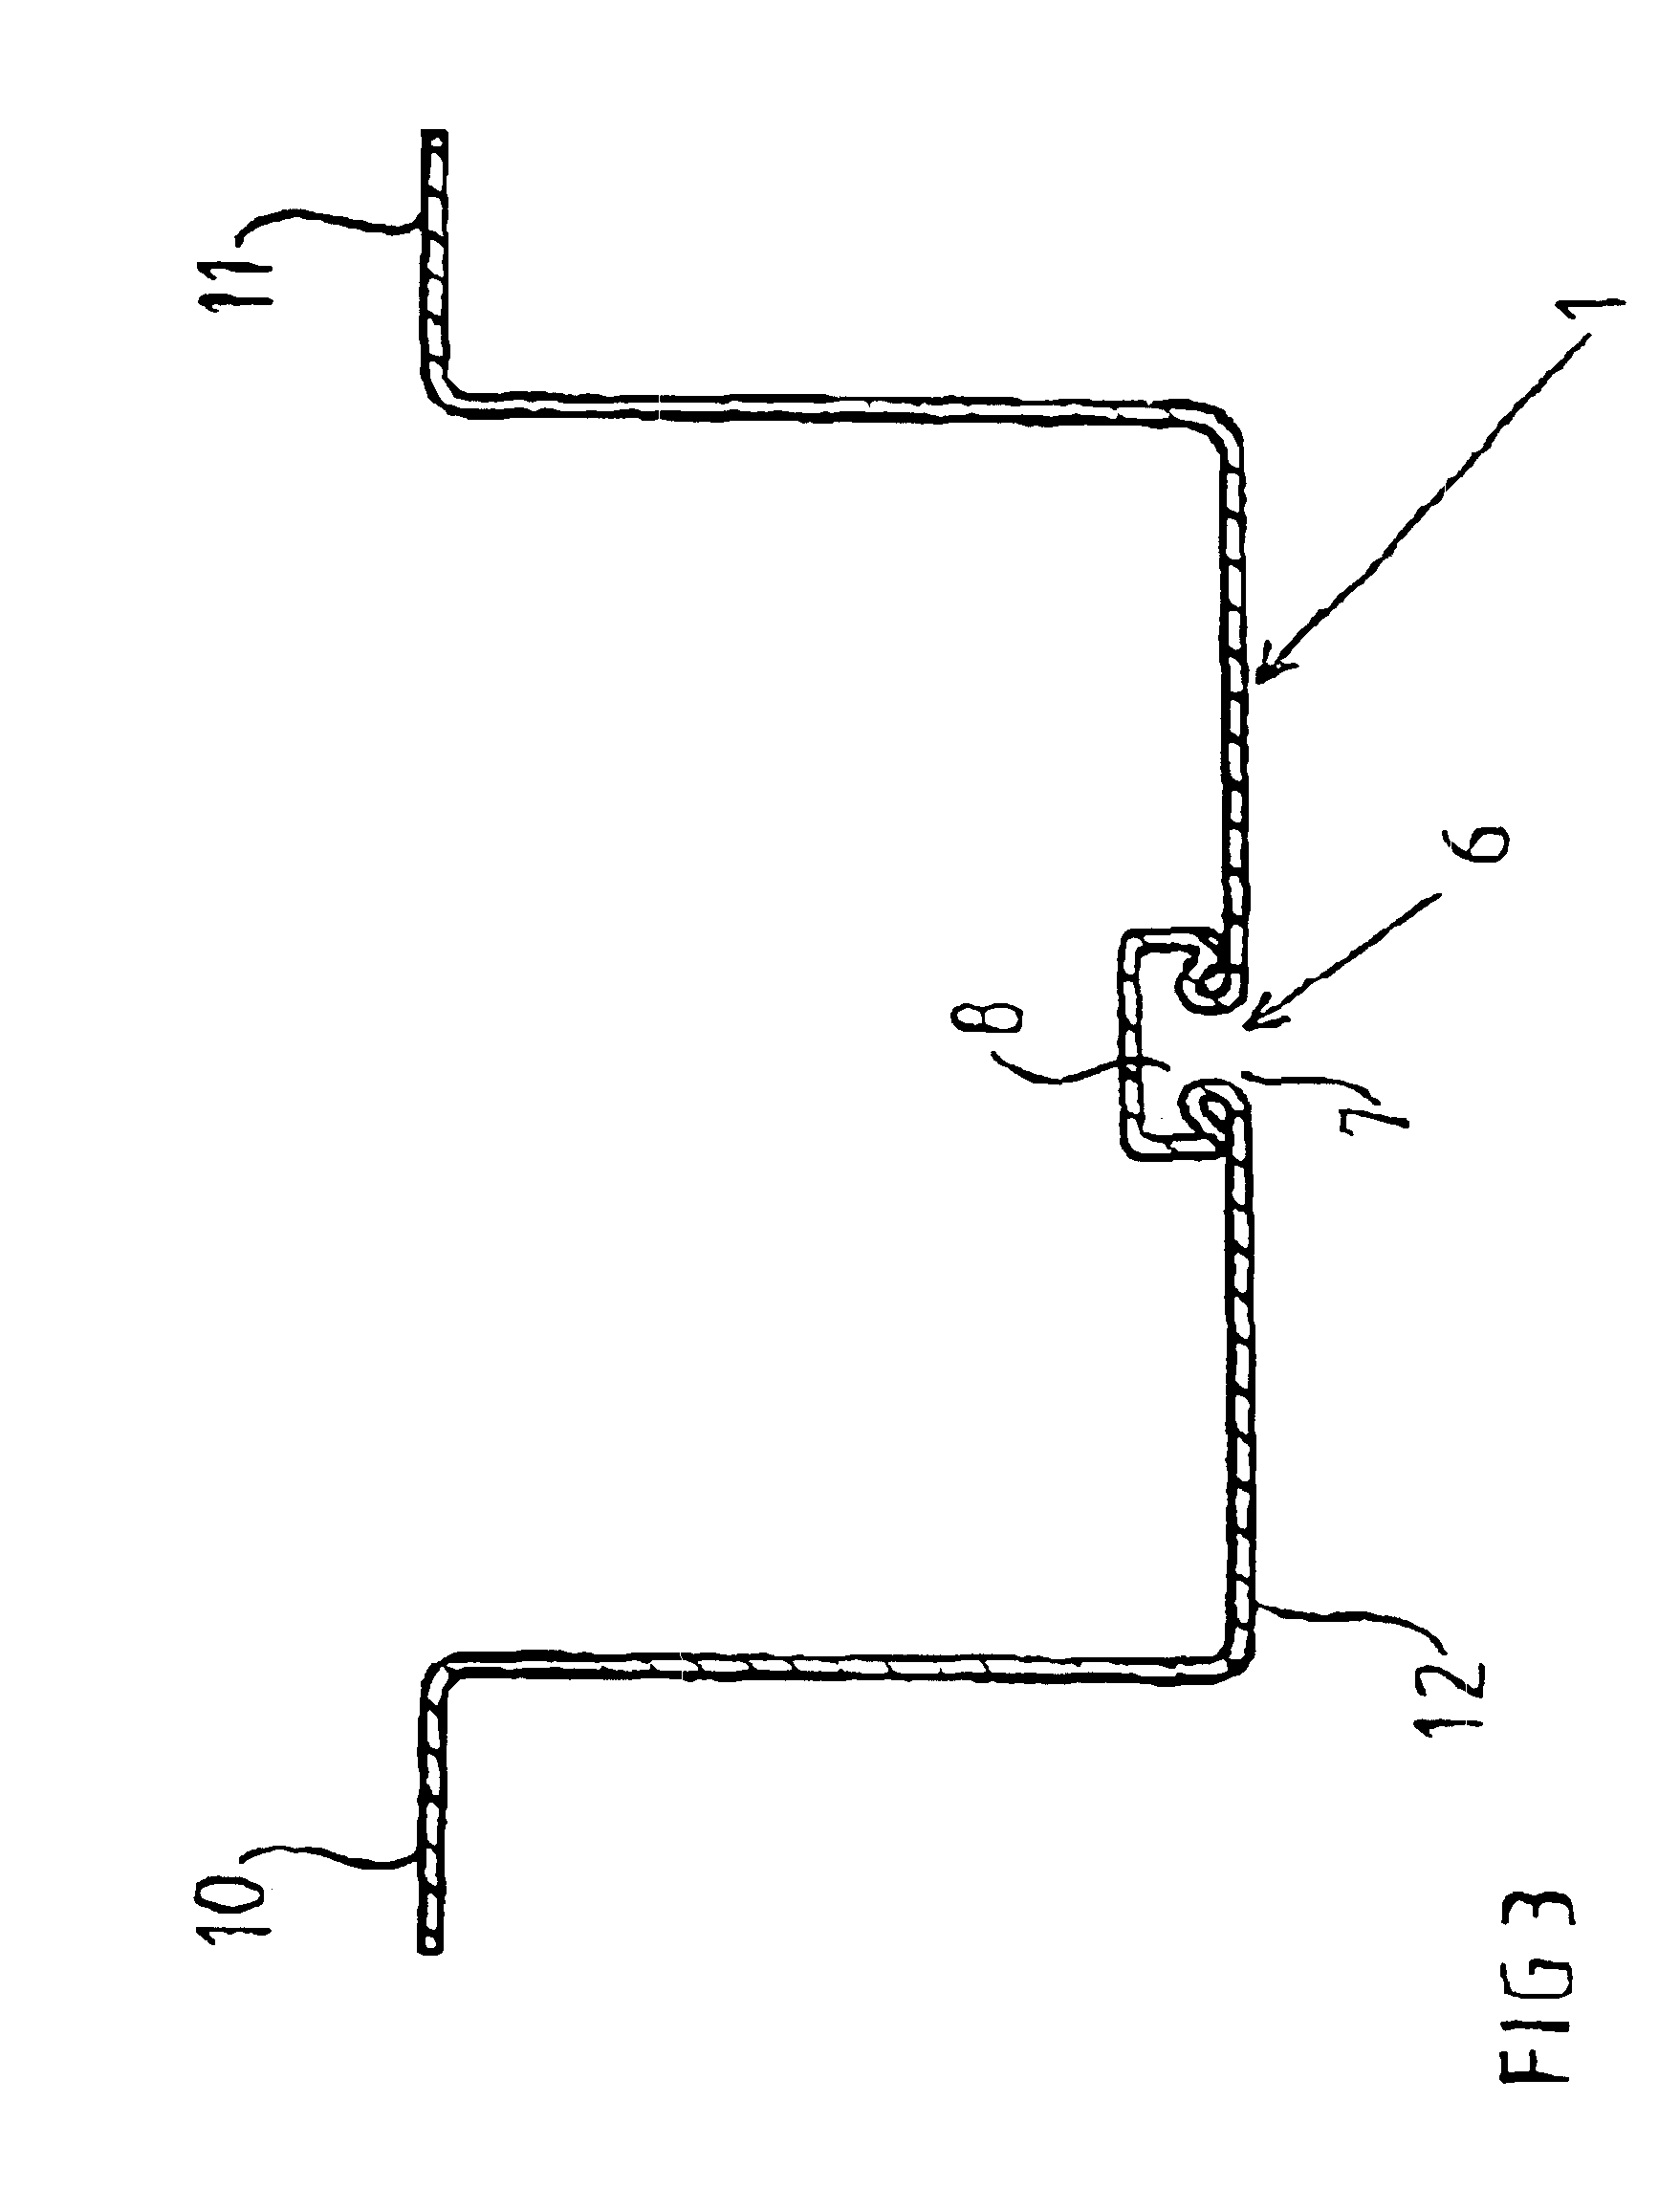 Car body and a method for producing a beam